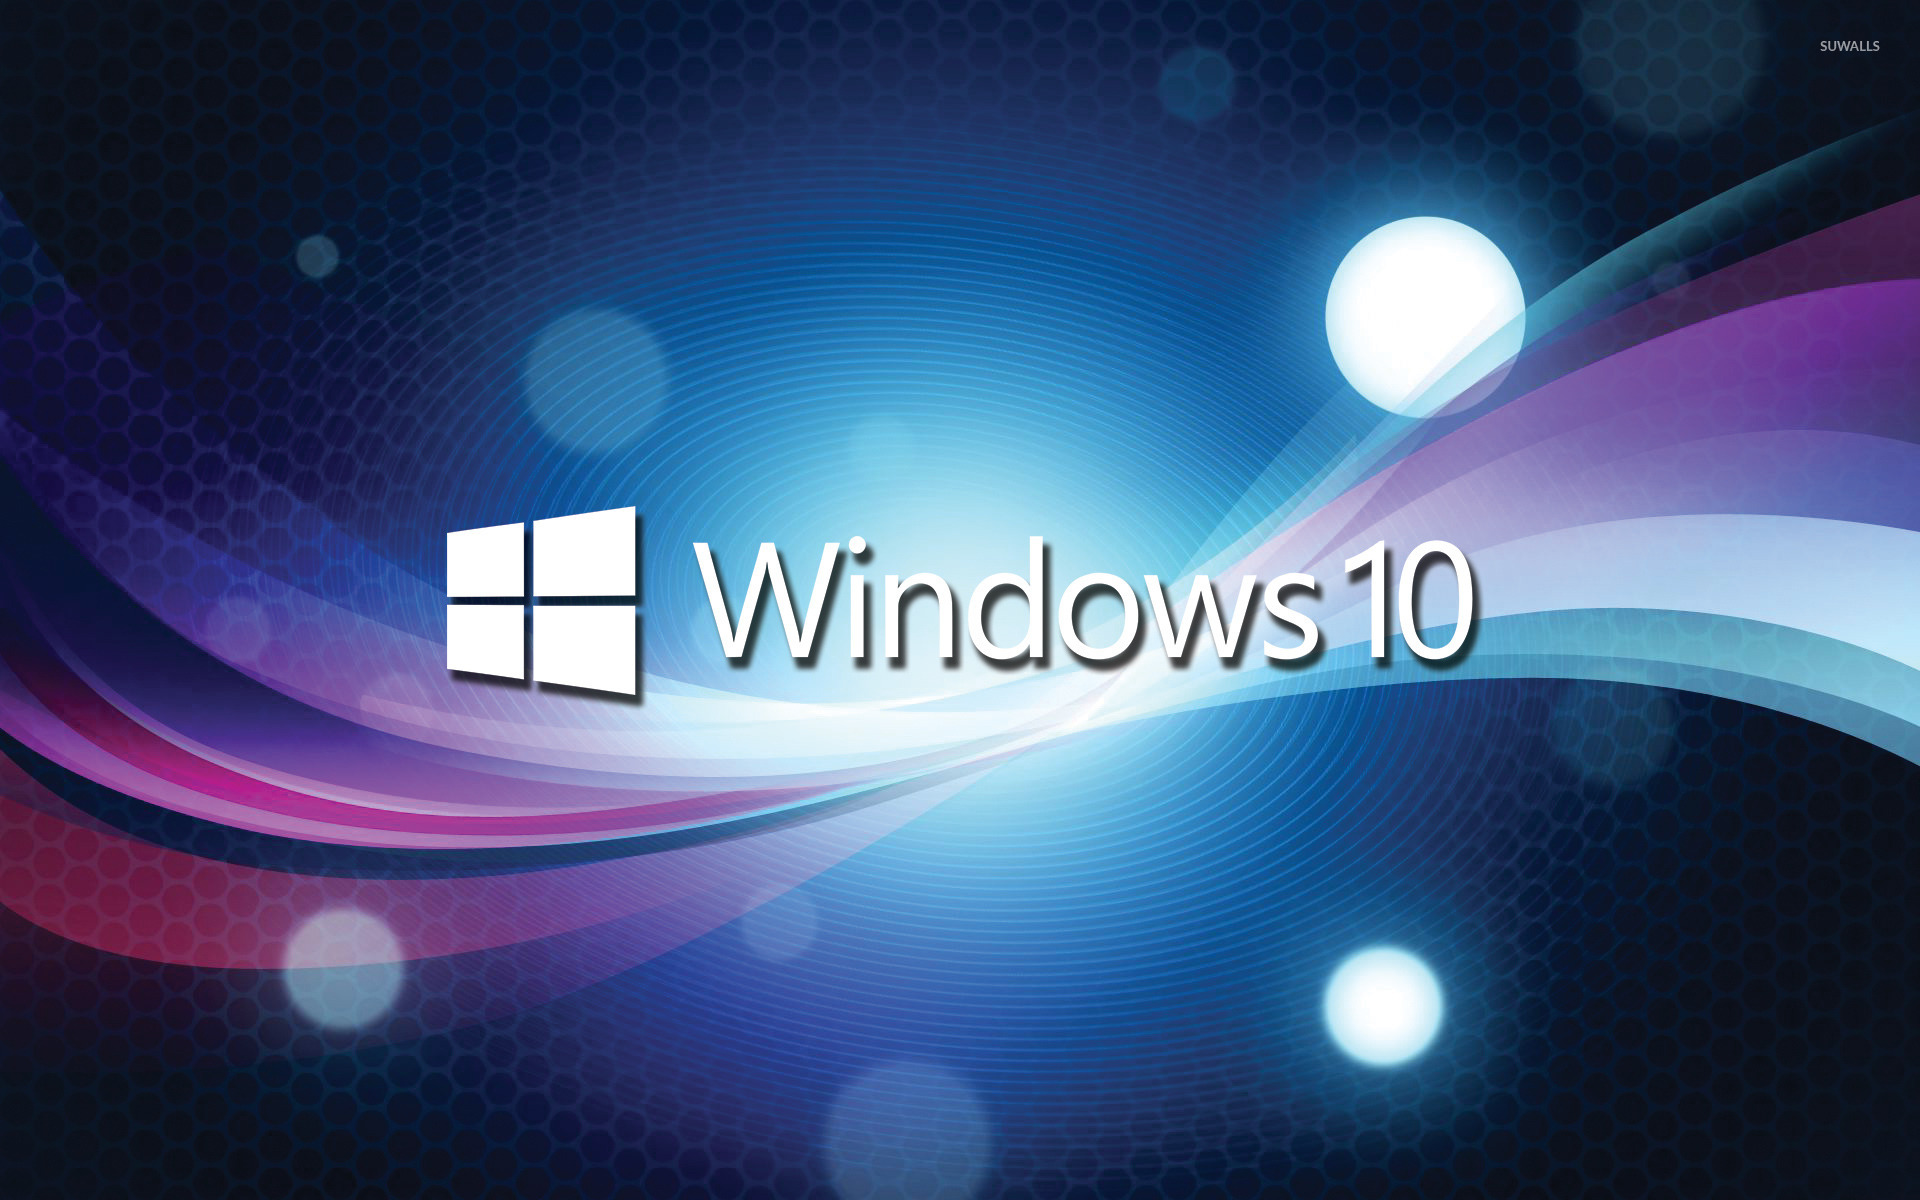 Windows 10 white text logo over the blue cuves wallpaper 1680x1050